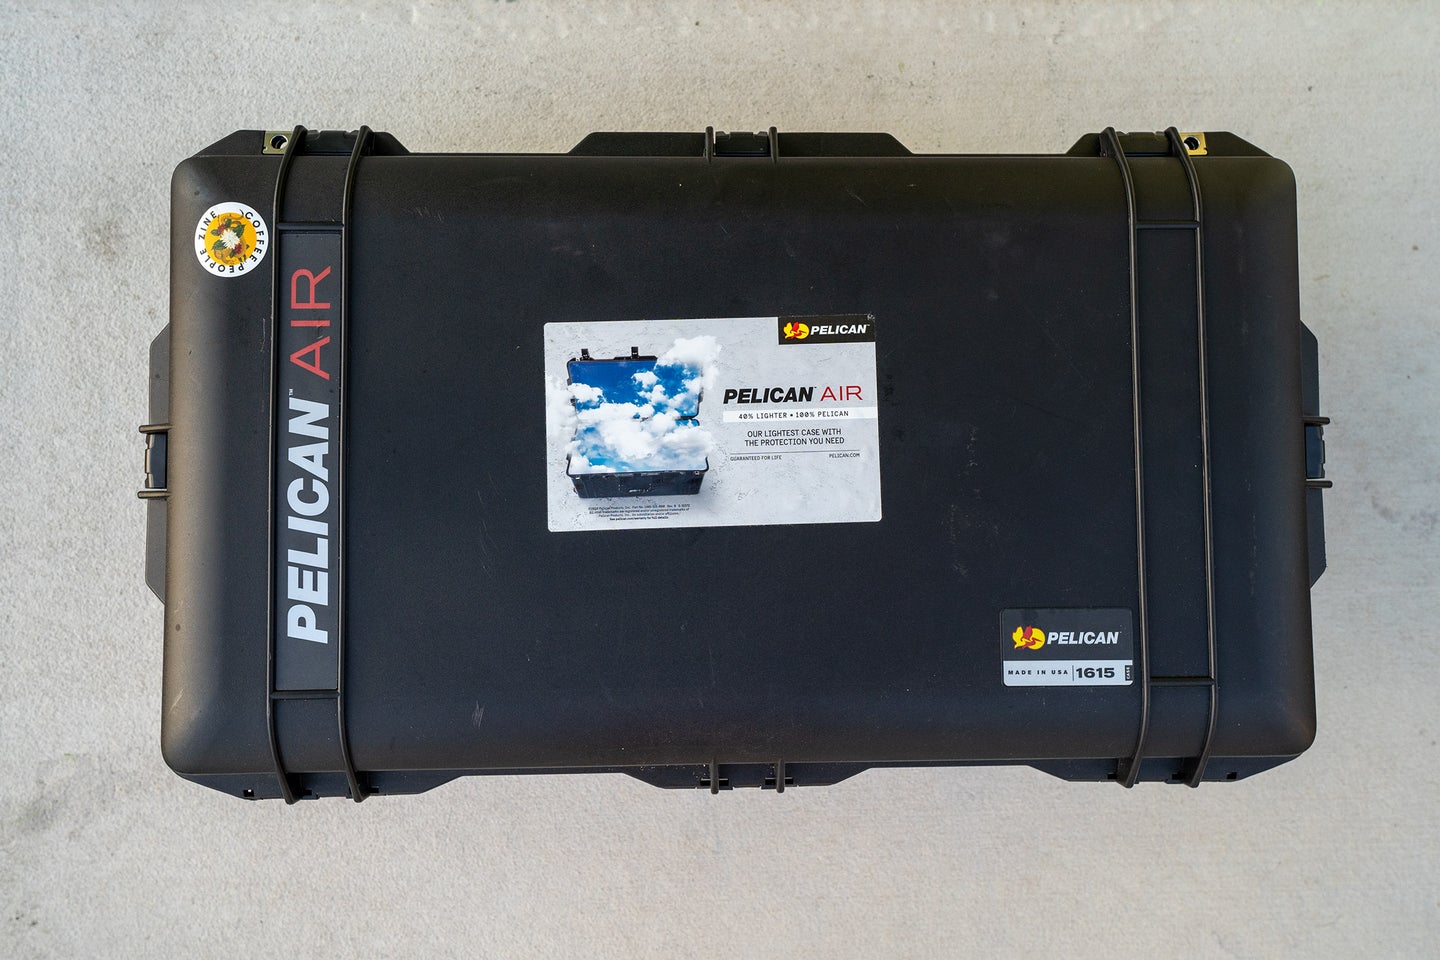 The Pelican Air 1615 is a lightweight yet rugged case.